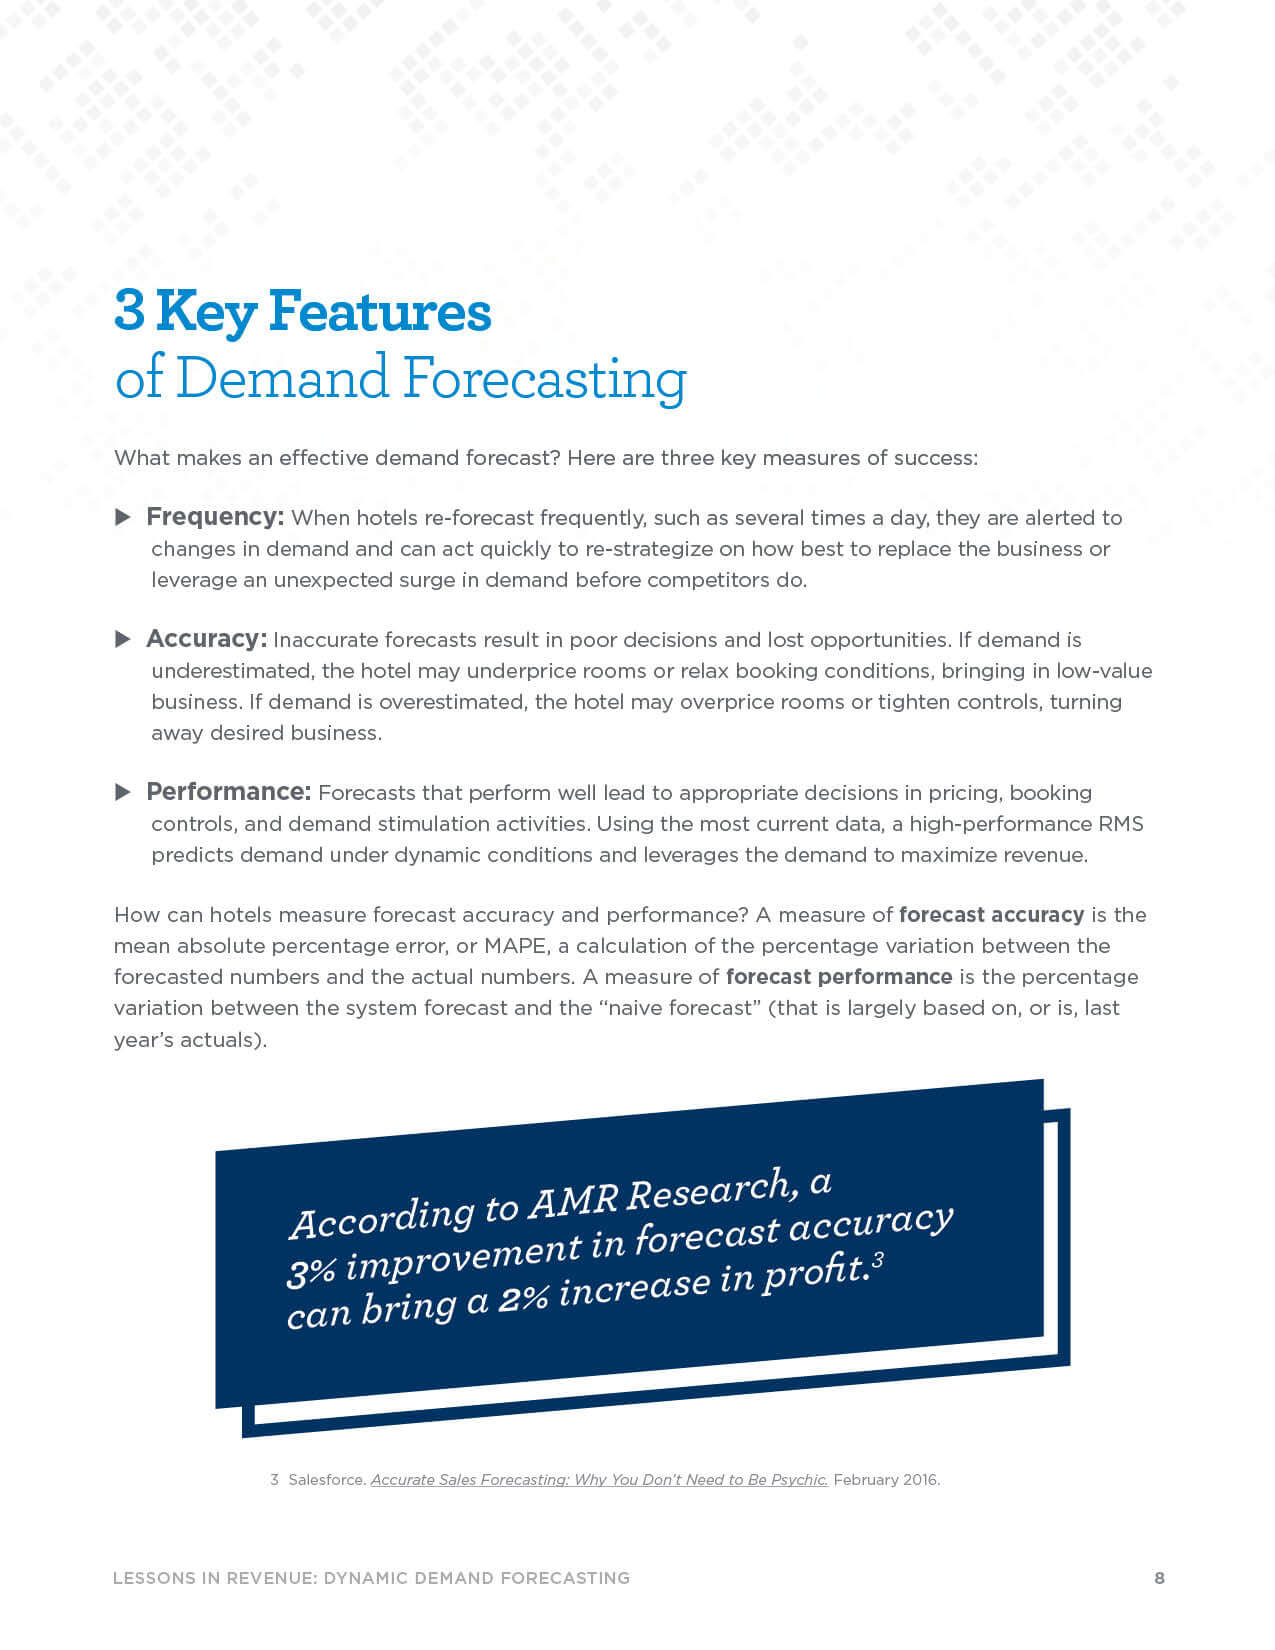 Page 8 - 3 Key Features of Demand Forecasting